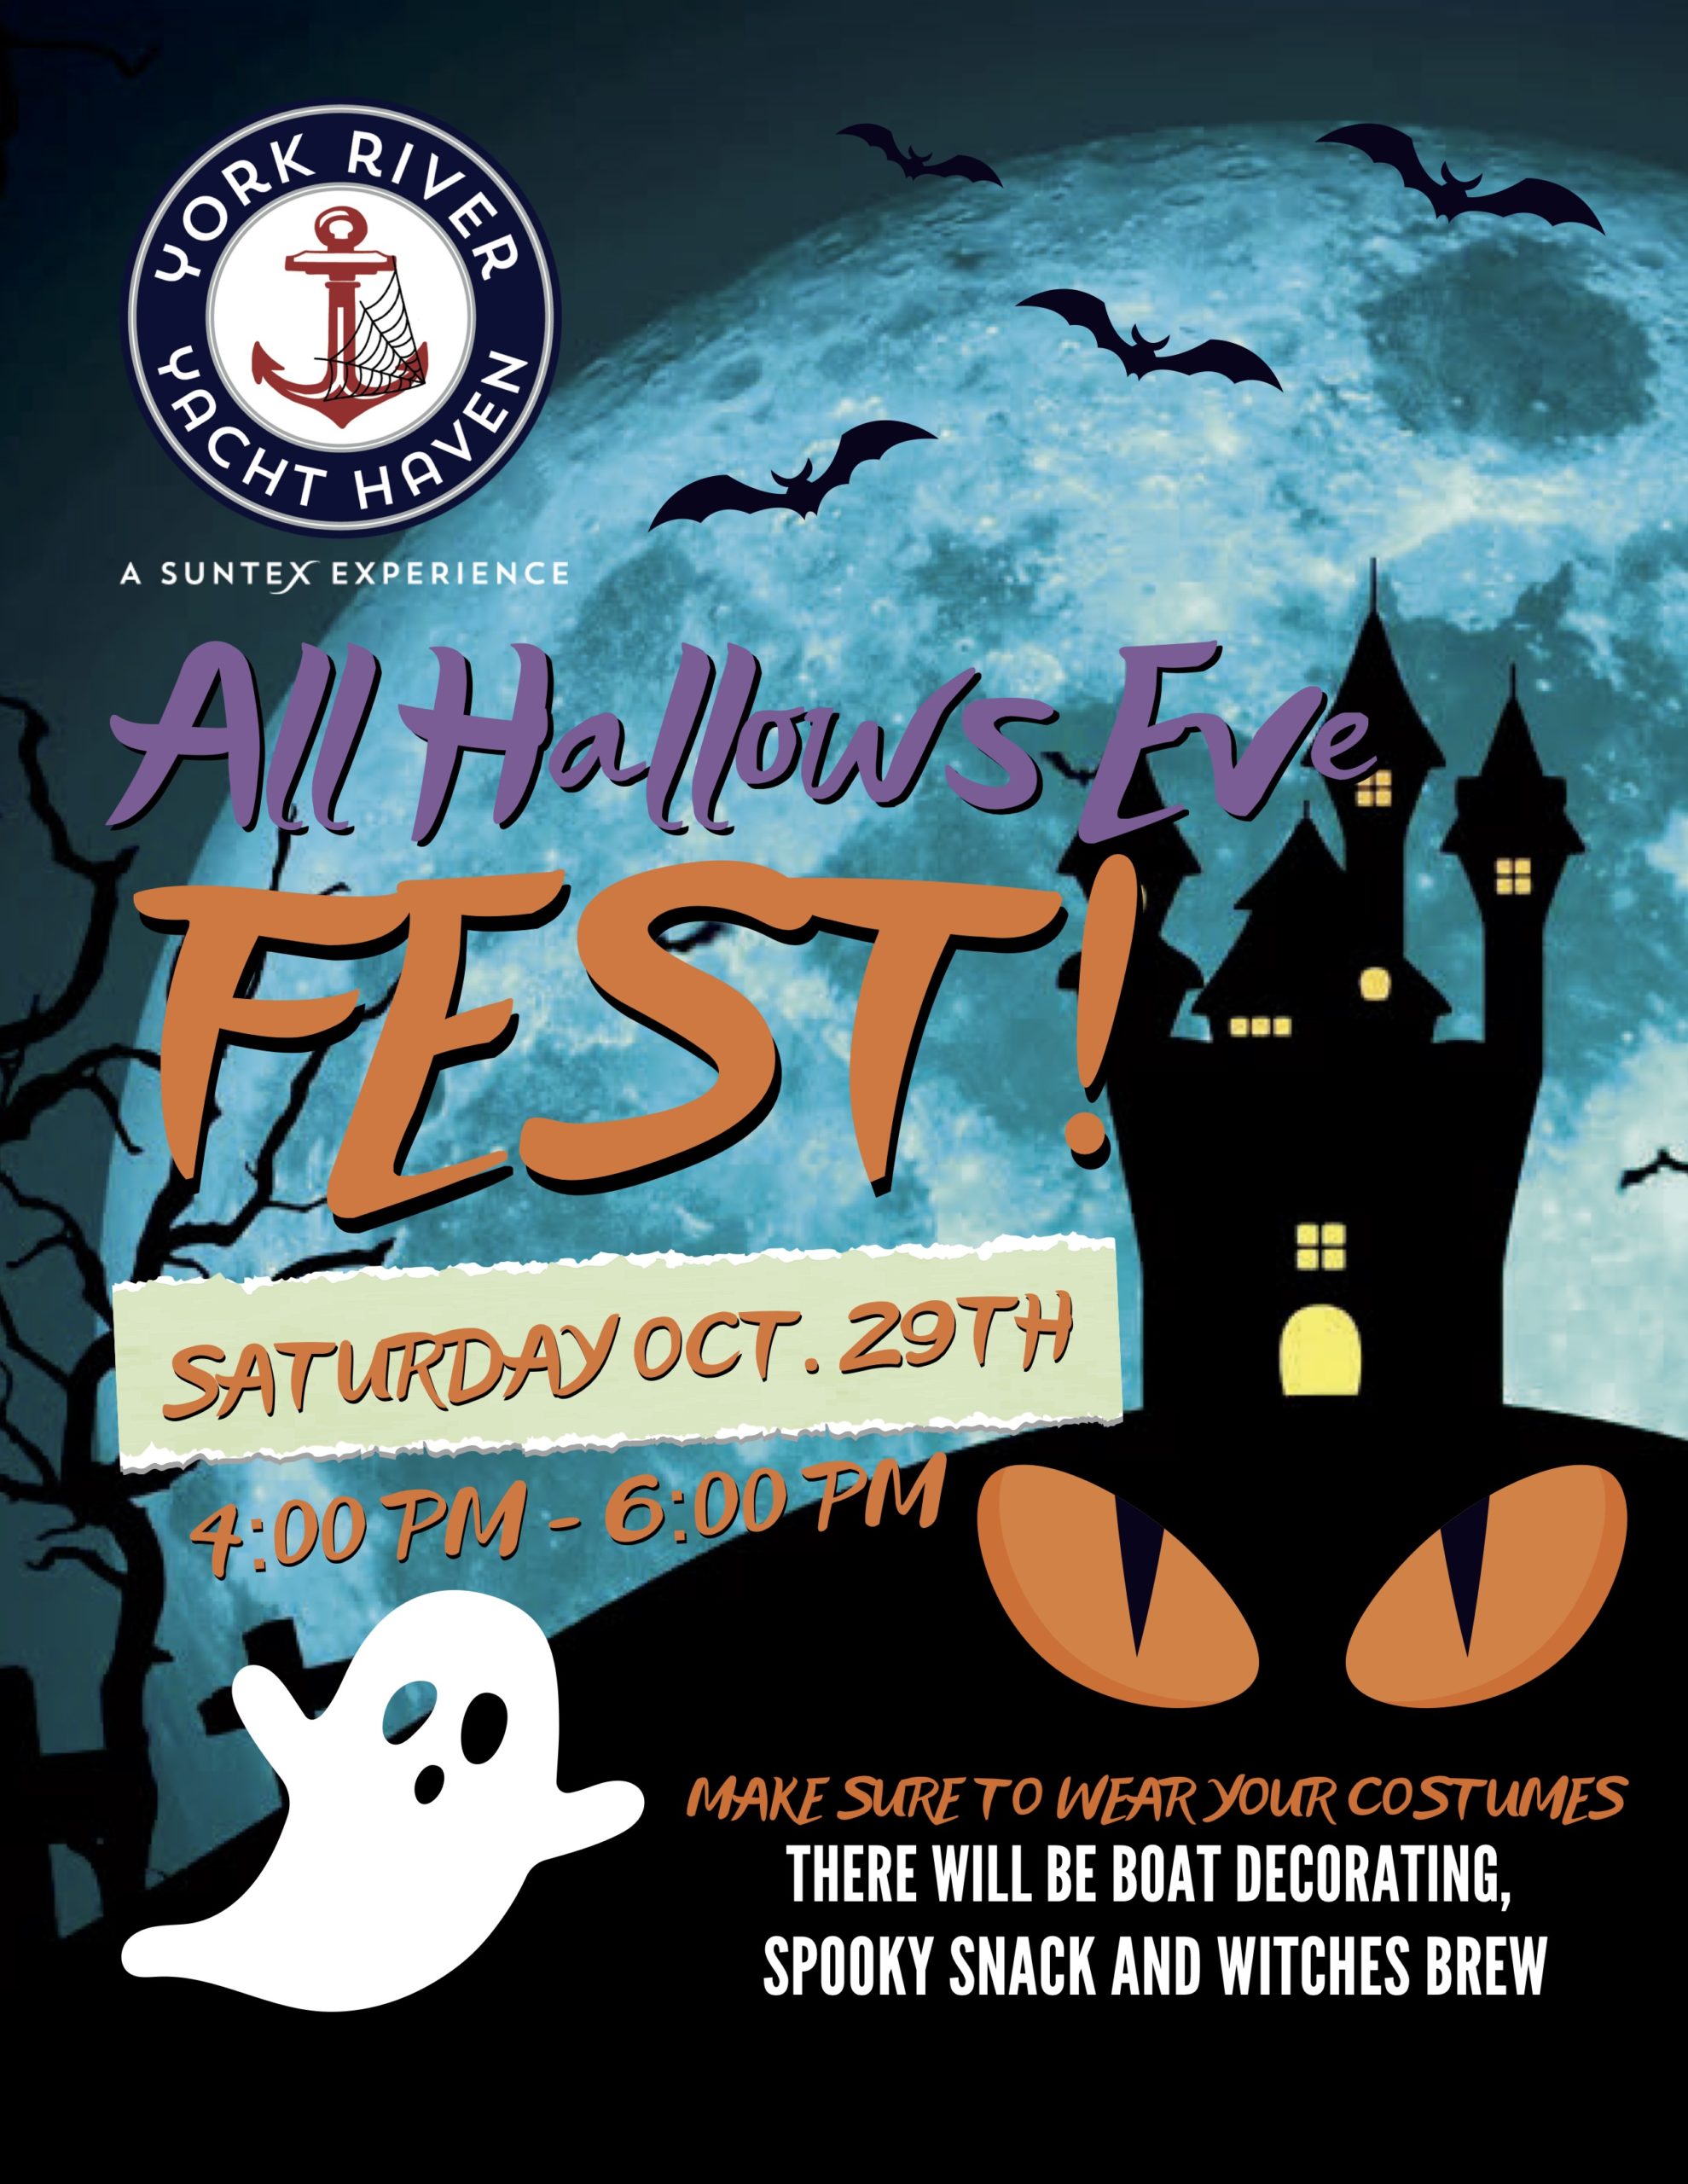 All Hallows Eve Event at York River Yacht Haven